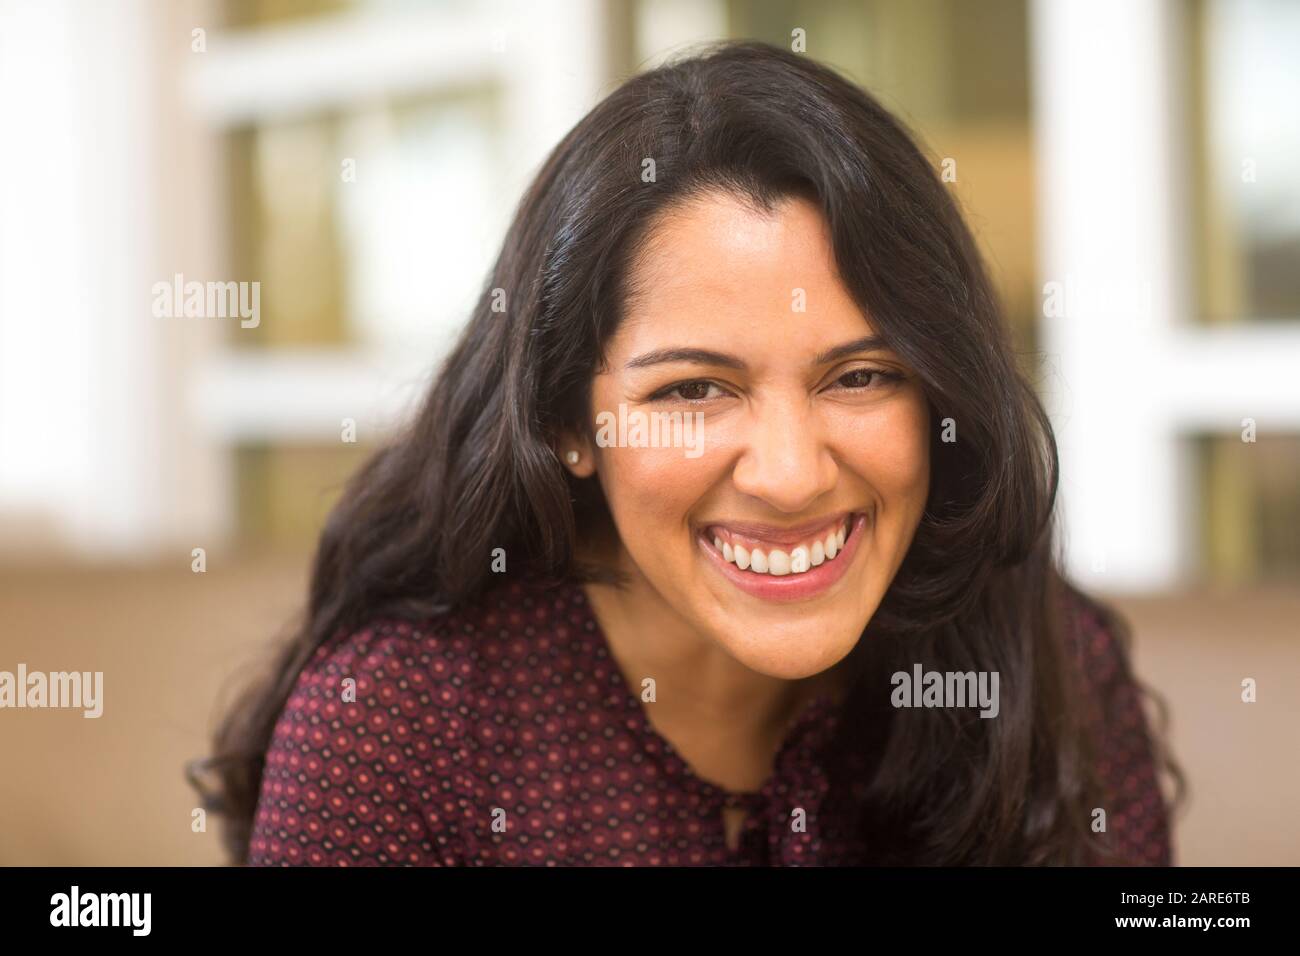 Confident Hispanic woman laughing and smiling stock photo Banque D'Images